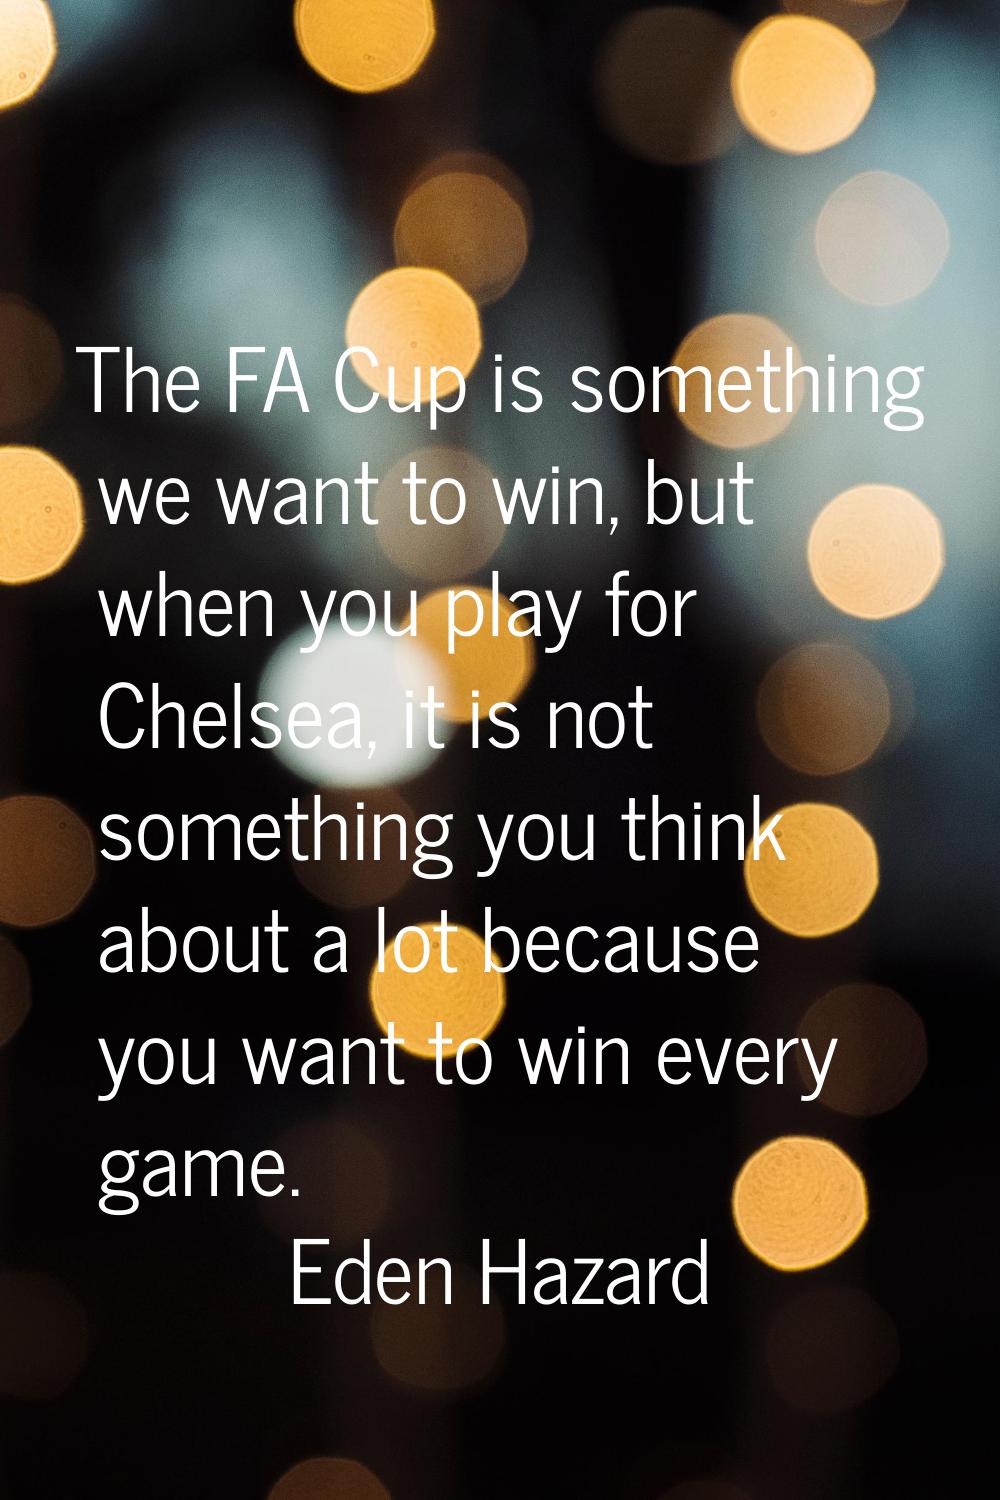 The FA Cup is something we want to win, but when you play for Chelsea, it is not something you thin